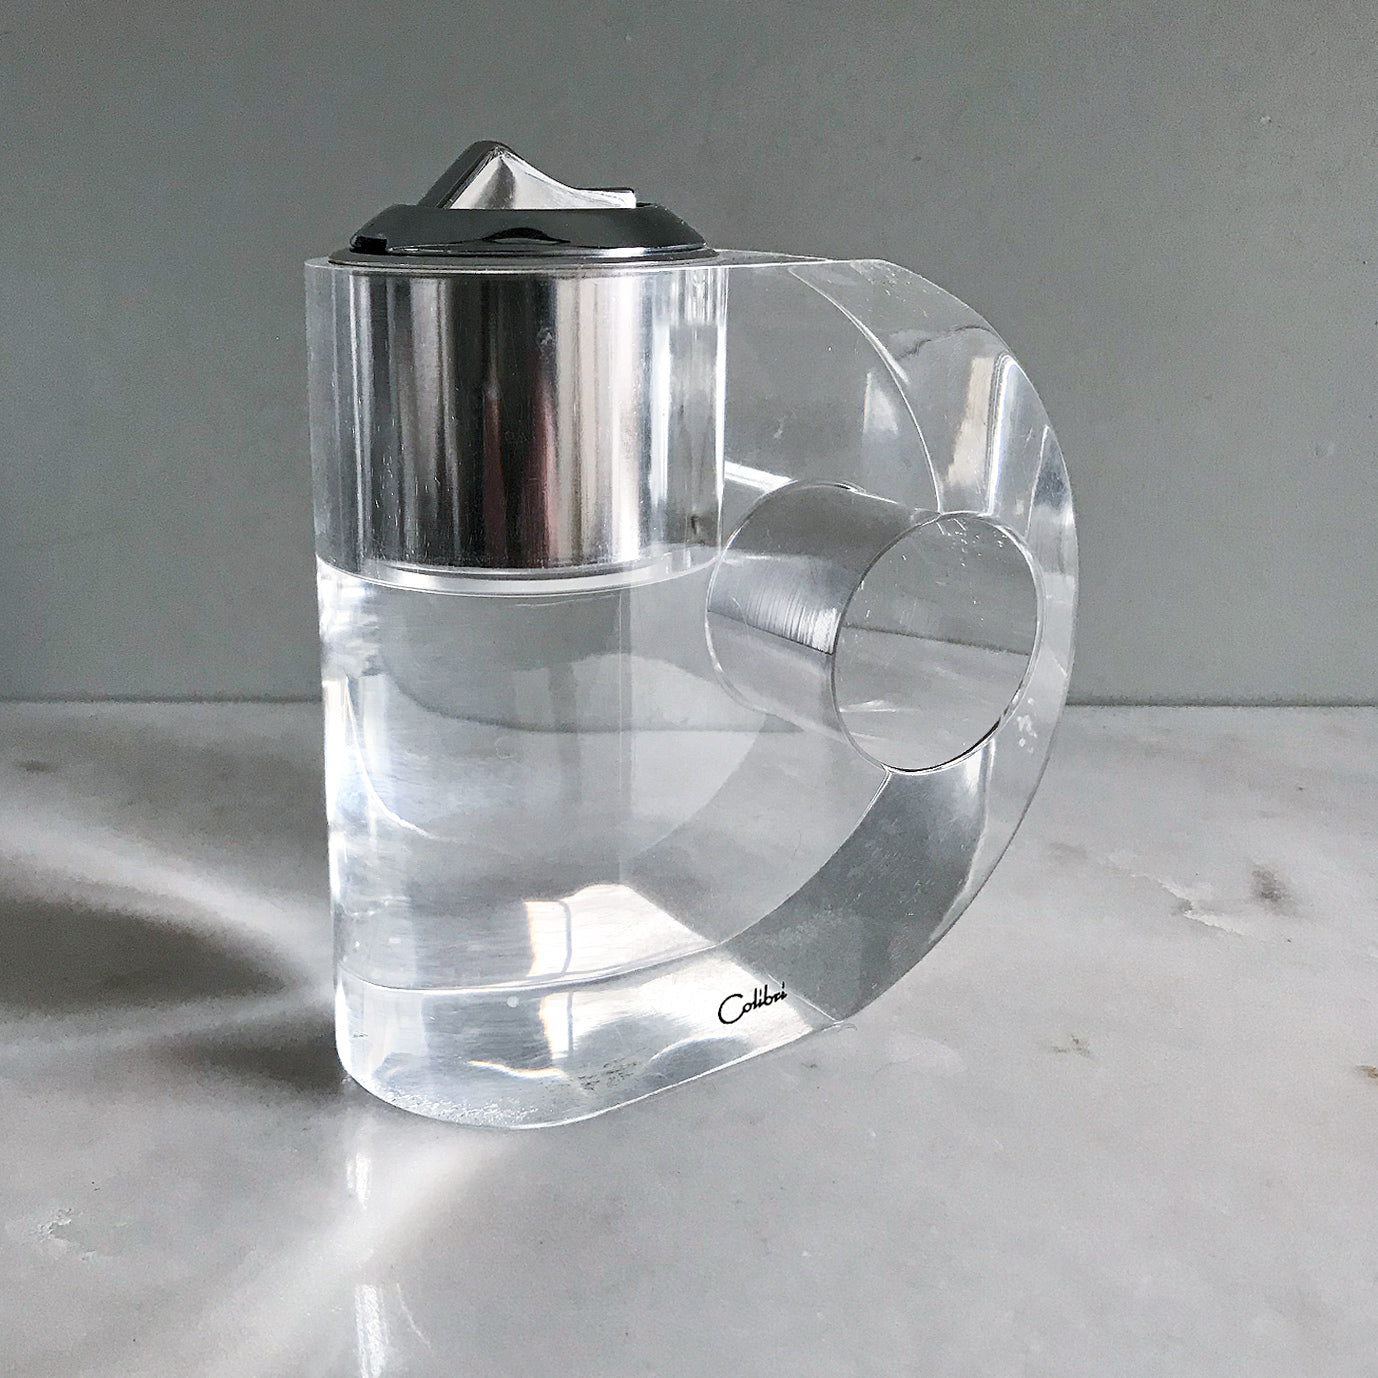 Uber cool large Vintage Colabri Table Lighter in a chunky perspex - SHOP NOW - www.intovintage.co.uk